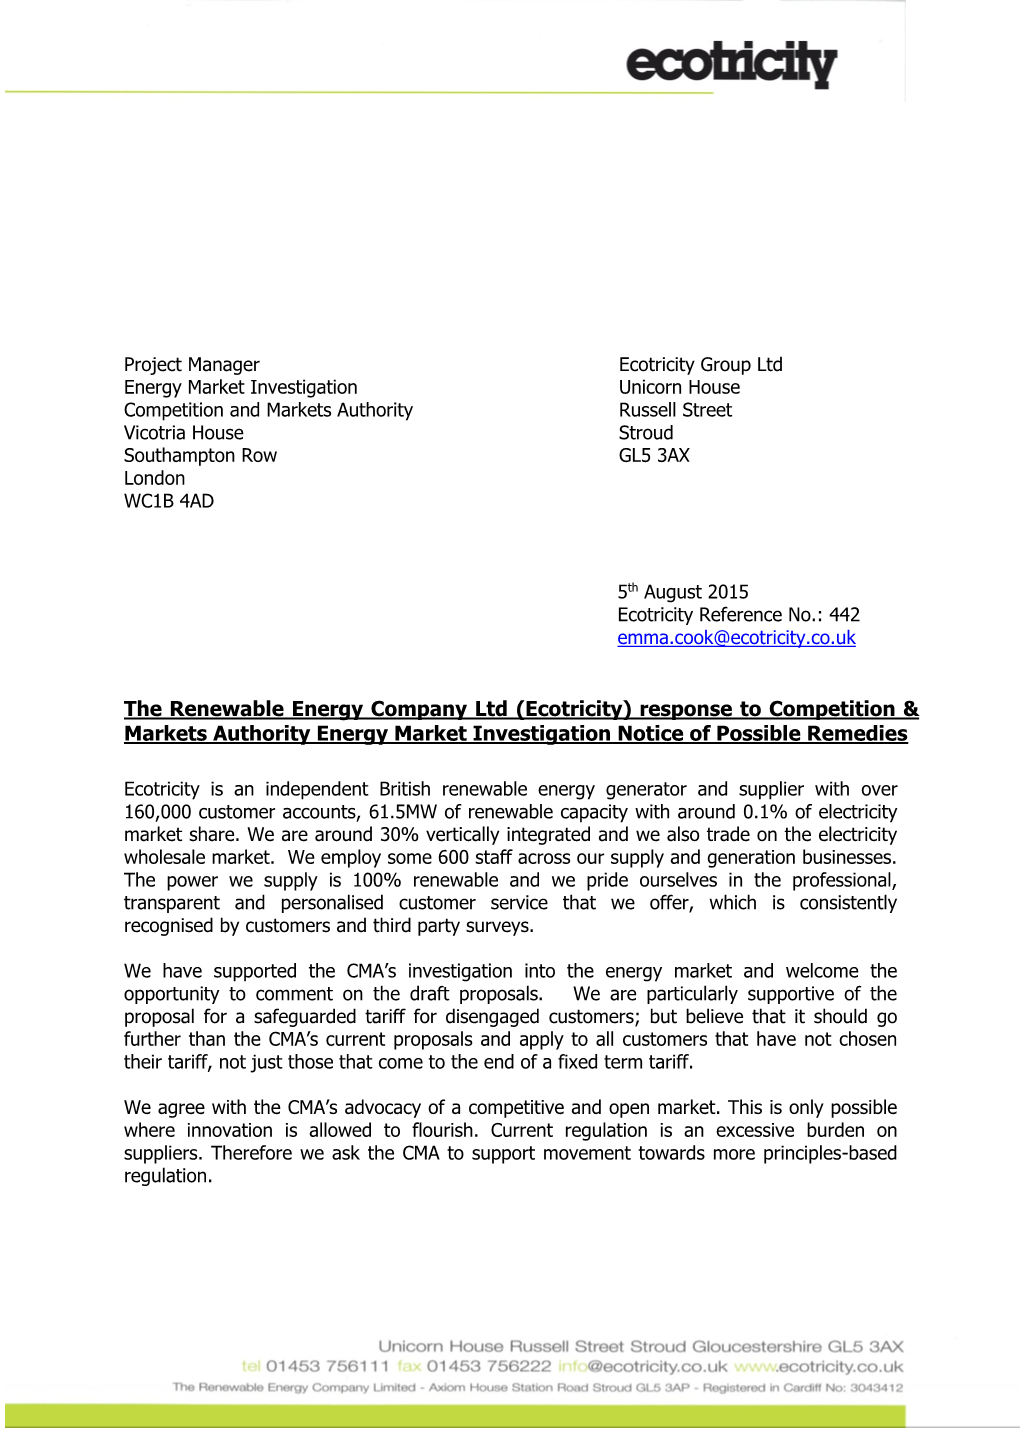 The Renewable Energy Company Ltd (Ecotricity) Response to Competition & Markets Authority Energy Market Investigation Notice